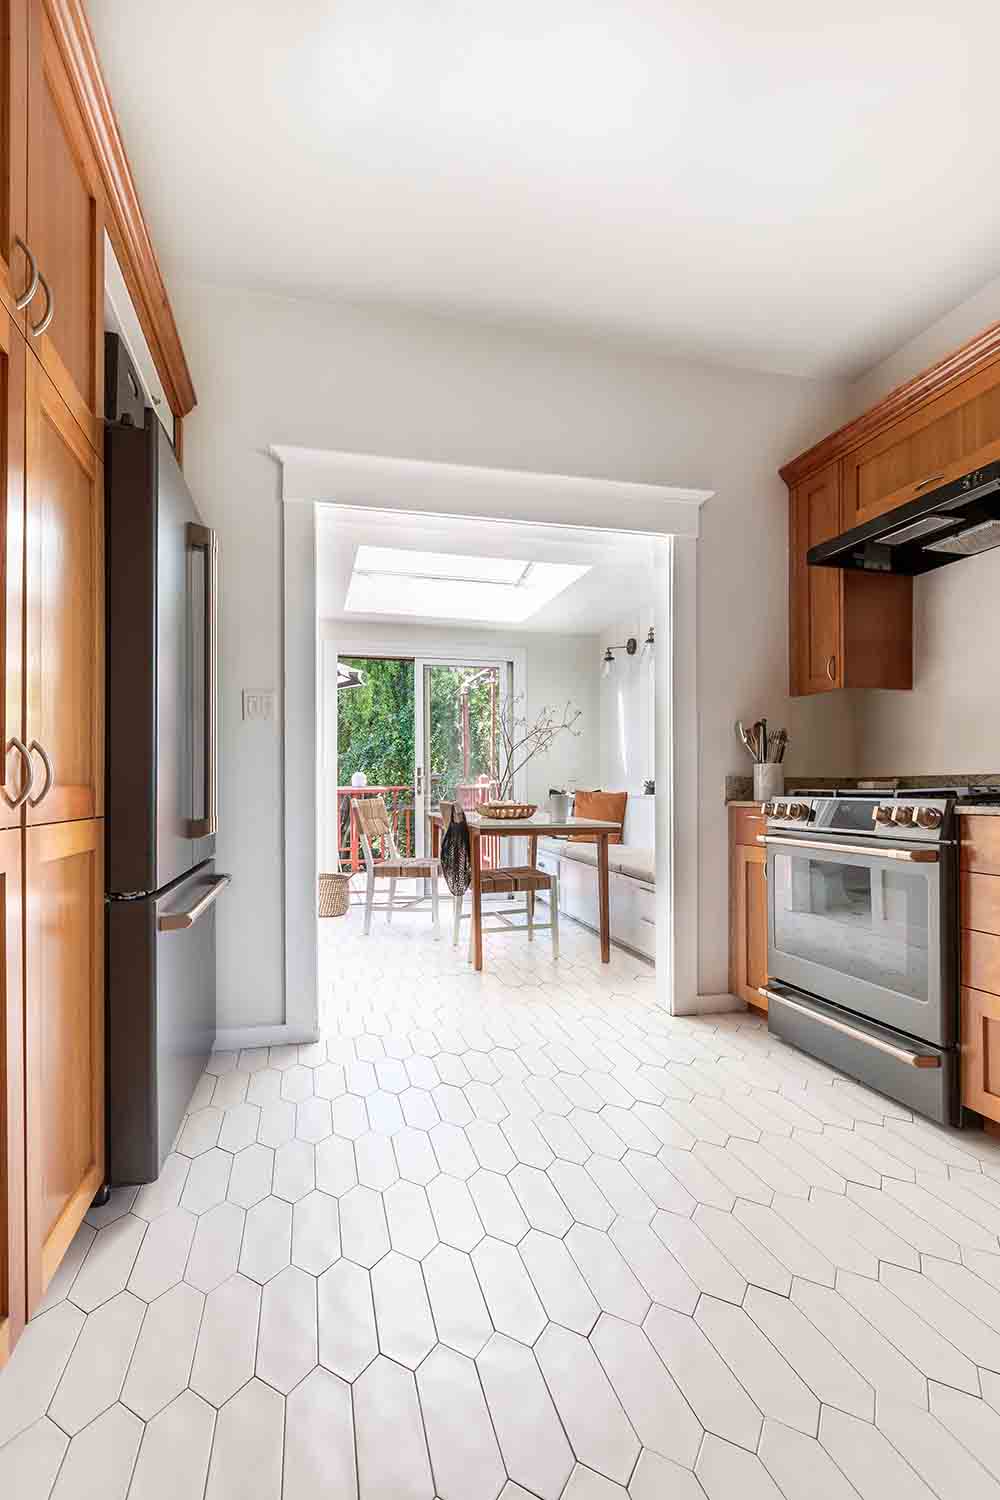 A kitchen with updated flooring.